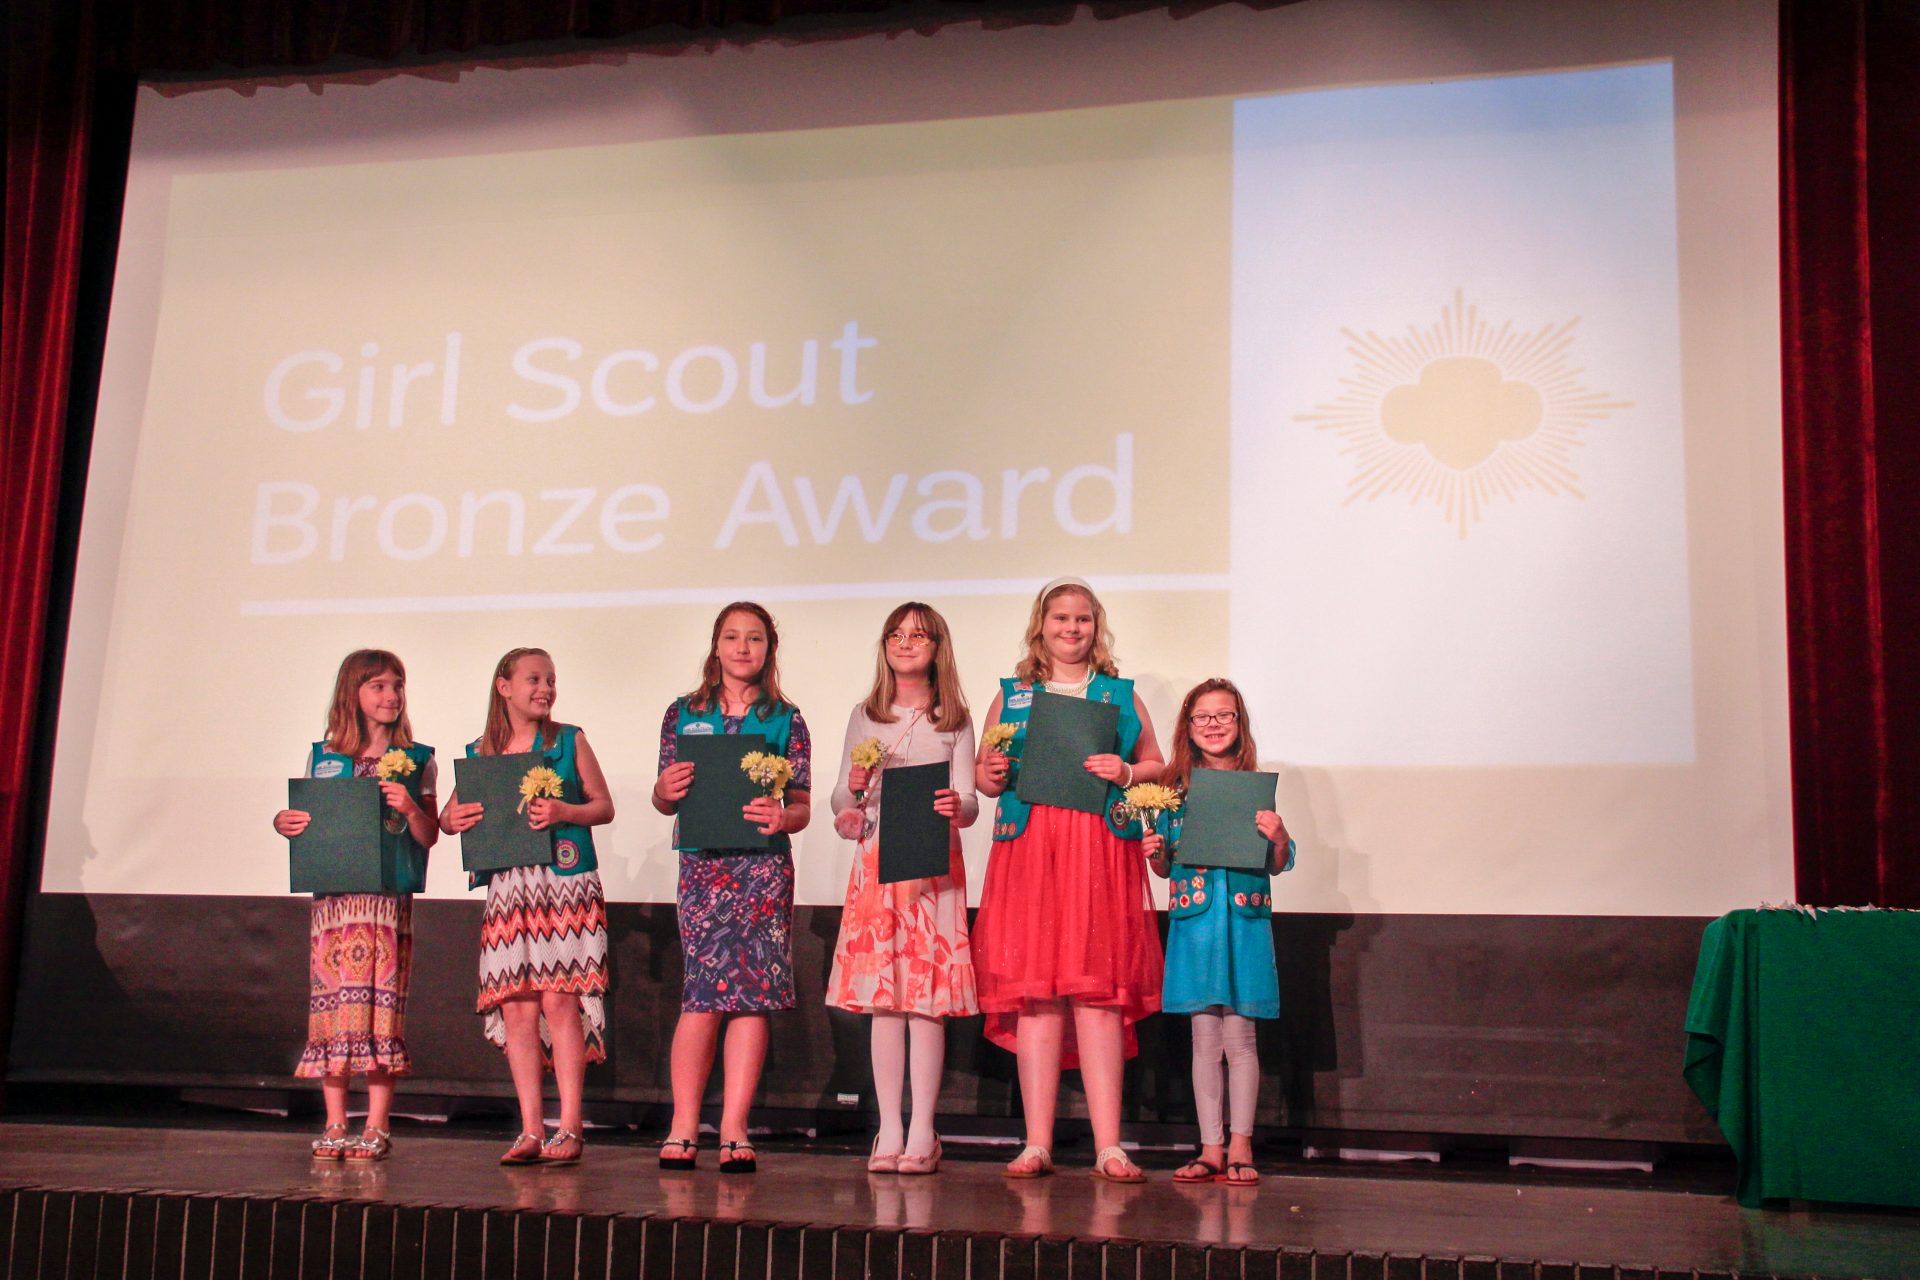  junior girl scout wearing uniform vest with bronze award pin 